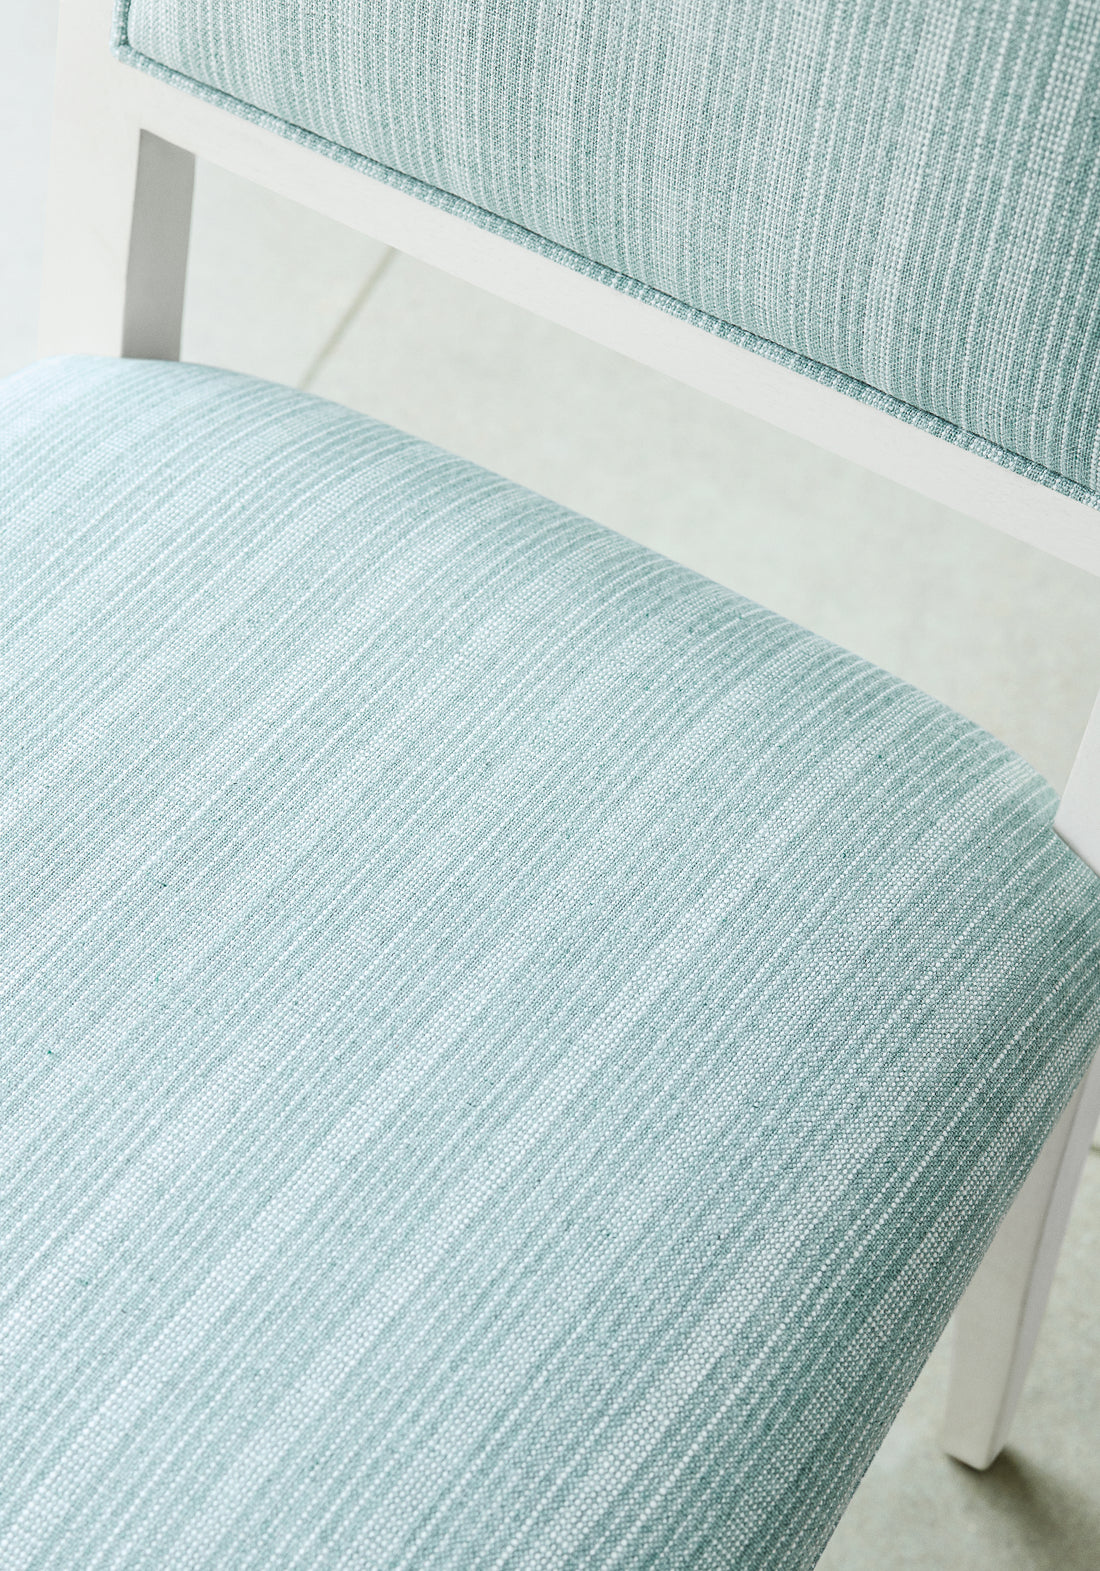 Dining chair in Ebro Stripe fabric in seafoam color - pattern number W8508 - by Thibaut in the Villa collection